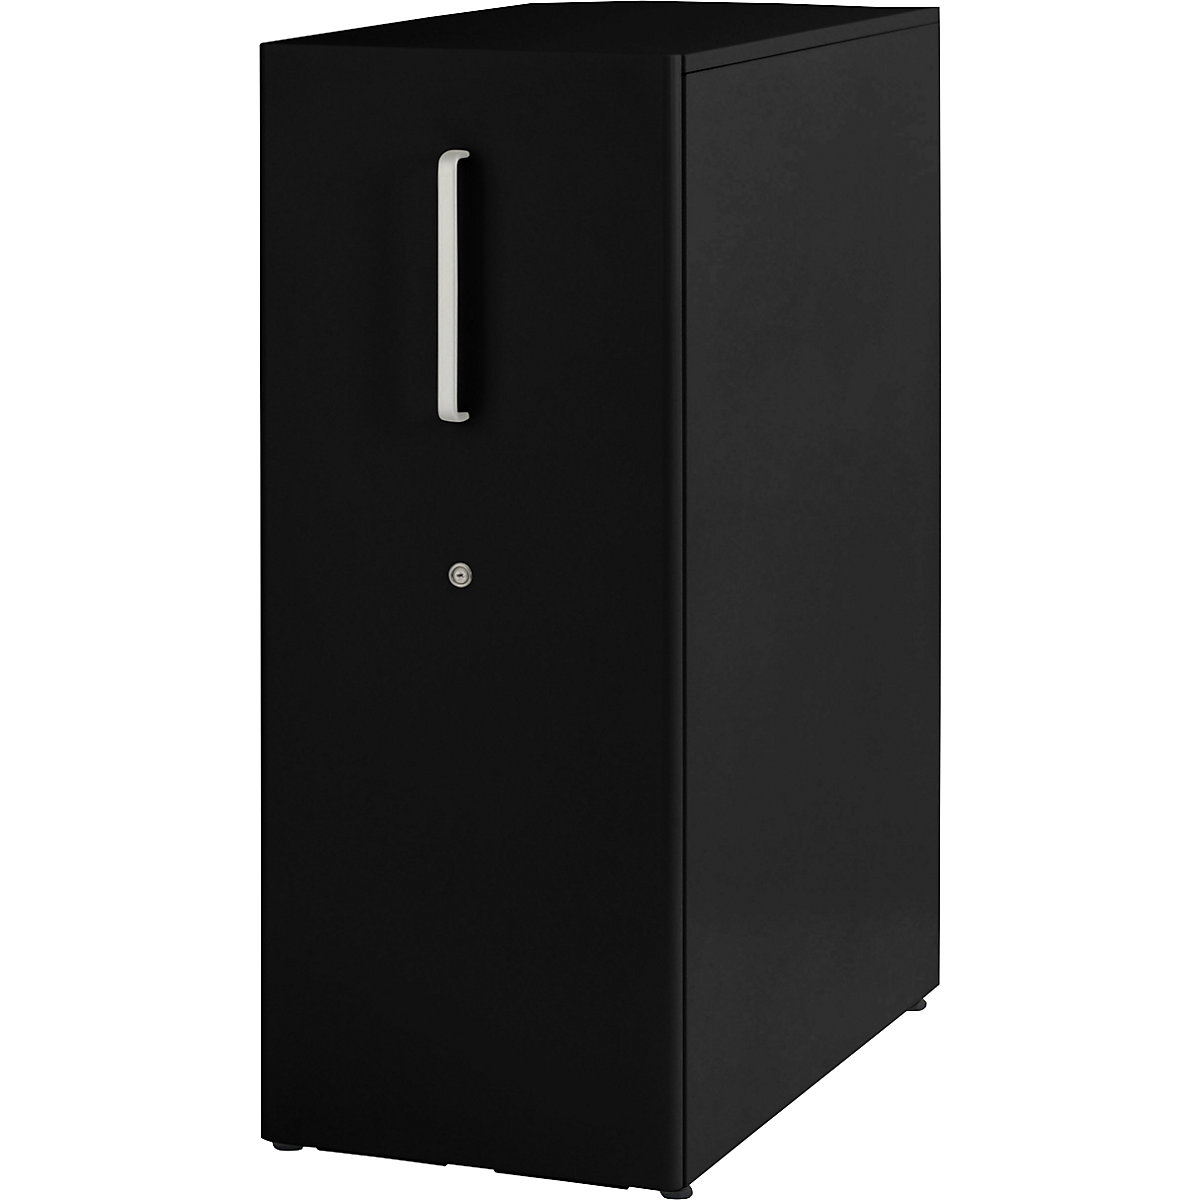 Tower™ 3 add-on furniture, with worktop – BISLEY, for the right side, 3 shelves, black-16